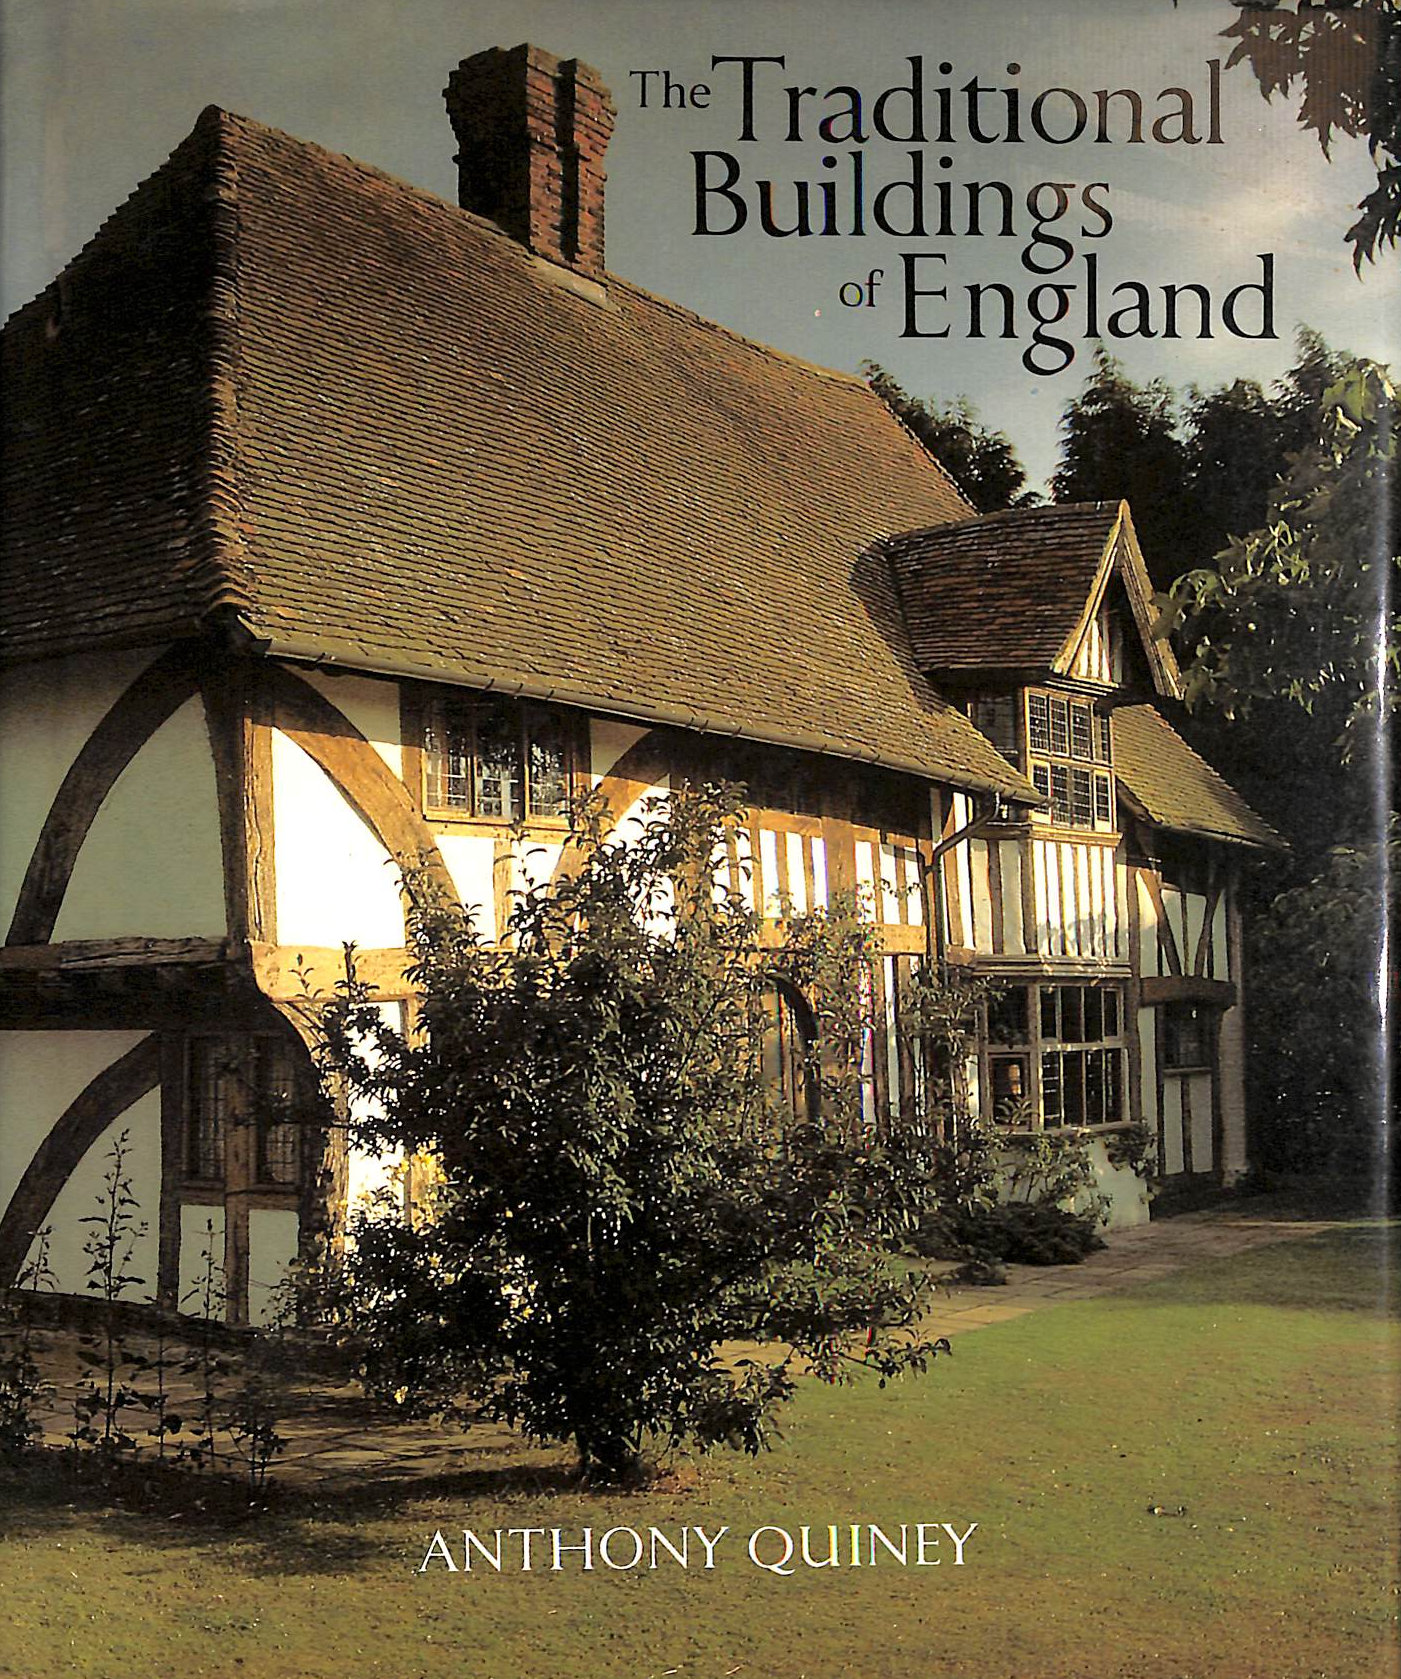 A QUINEY - The Traditional Buildings of England